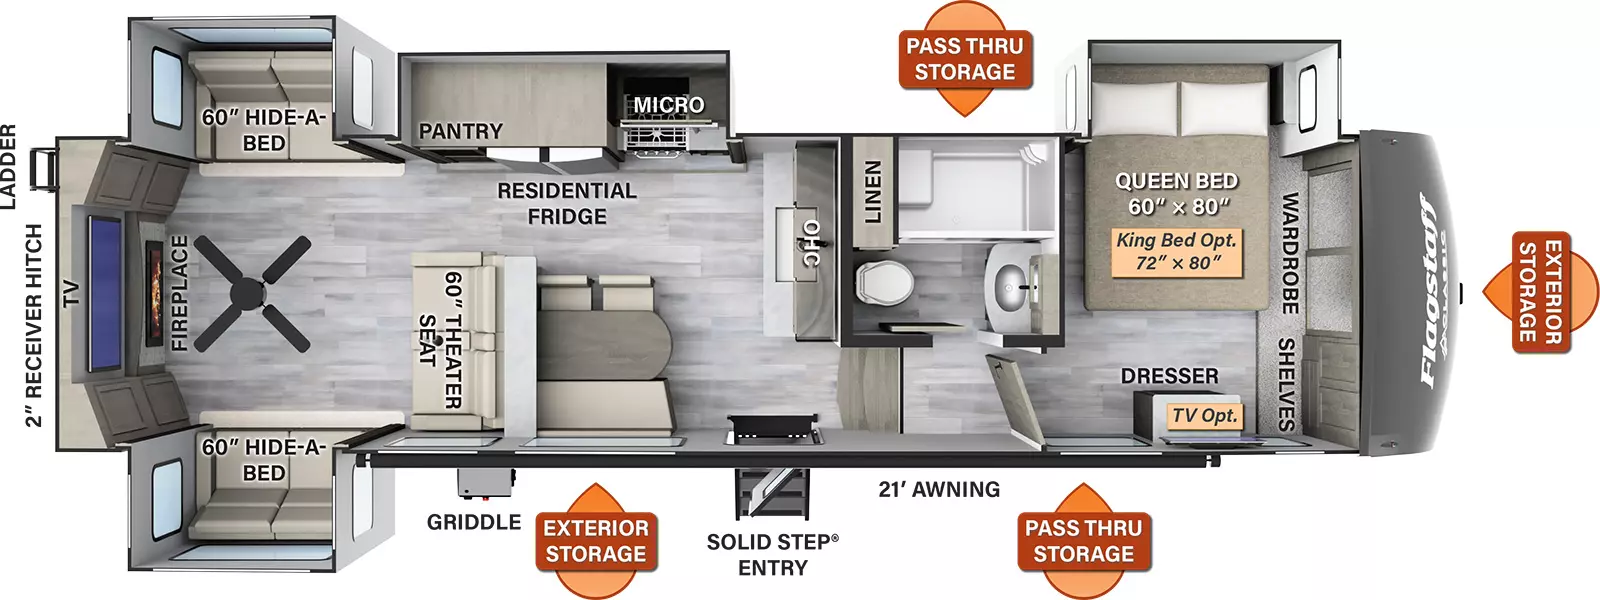 The 529RLBS has four slides and one entry door. Three on the off door side and one on the door side. Exterior features include a 21 foot awning, pass through storage, exterior storage, griddle, rear ladder, and 2 inch receiver hitch. The interior layout from front to back: Queen bed off door side slideout, front wardrobe and shelves, and dresser (optional TV and king bed); side aisle full bathroom; kitchen with booth and barstools, sink with overhead cabinet, and off door side slideout with microwave, cooktop, residential refrigerator and pantry; rear living room with paddle fan, theater seating, opposing hide a bed sofa slideouts, and rear entertainment center with TV and fireplace. 